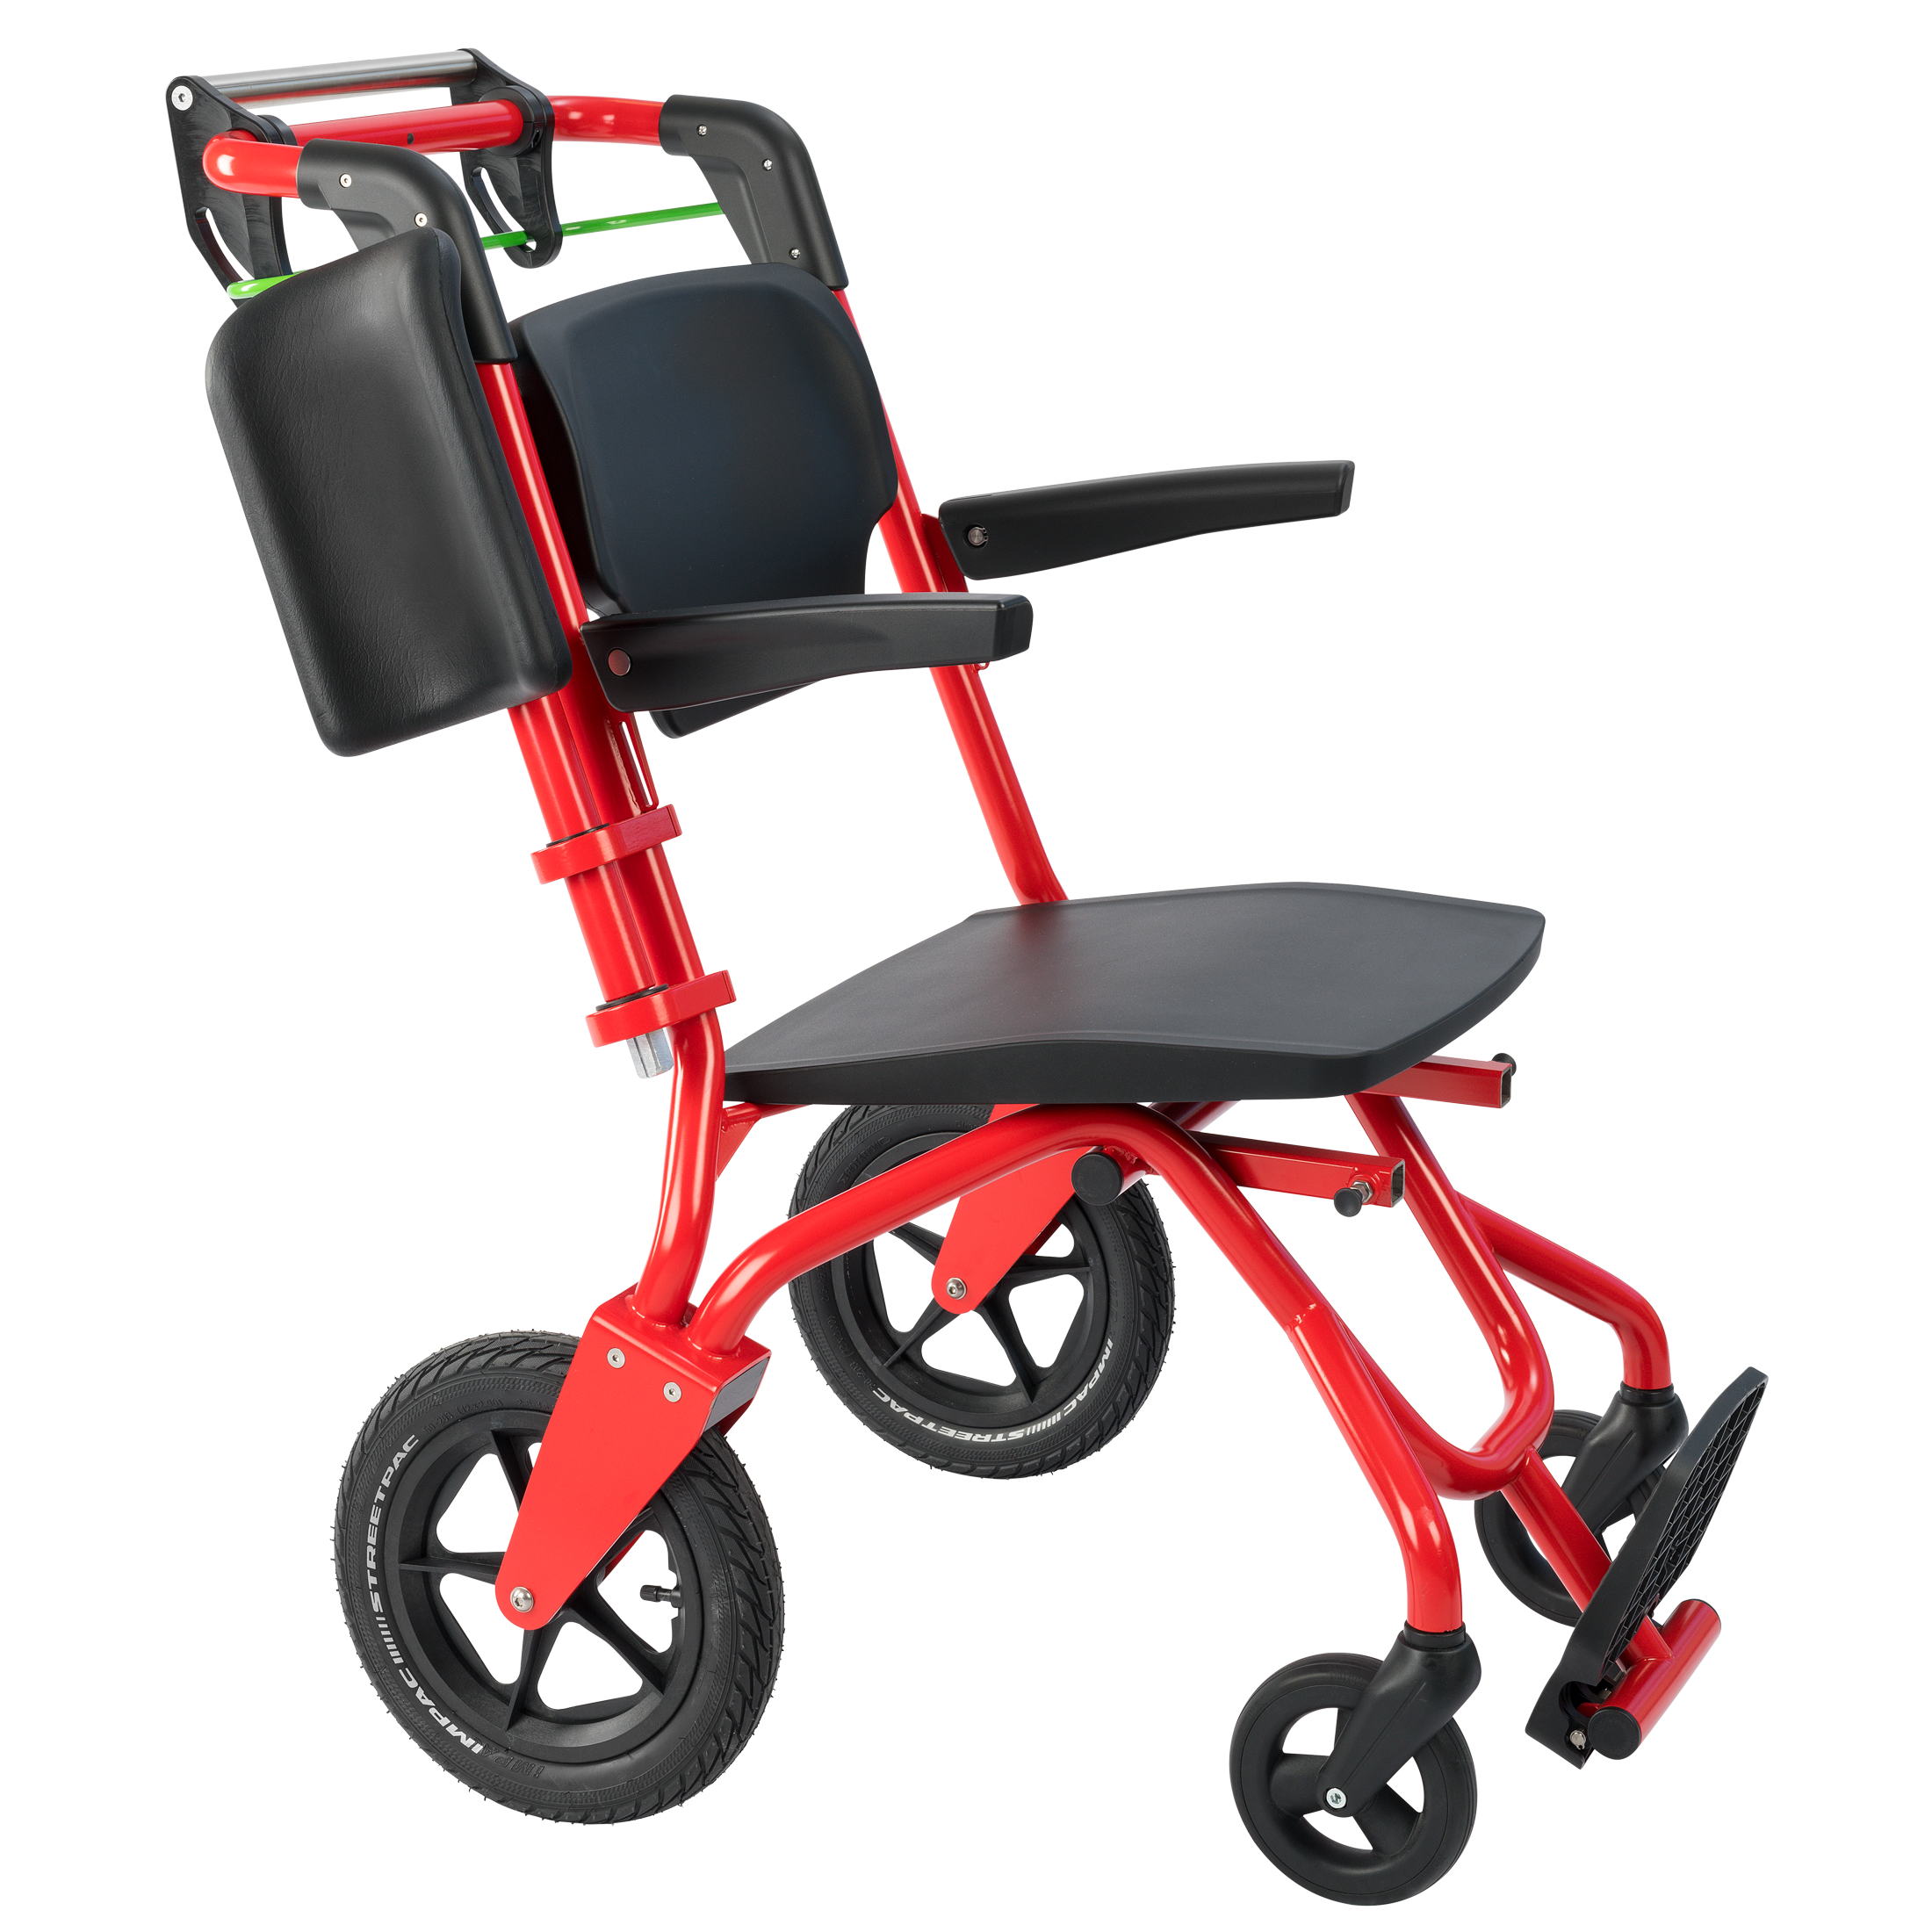 SAM - Mobile Patient Transfer Chair